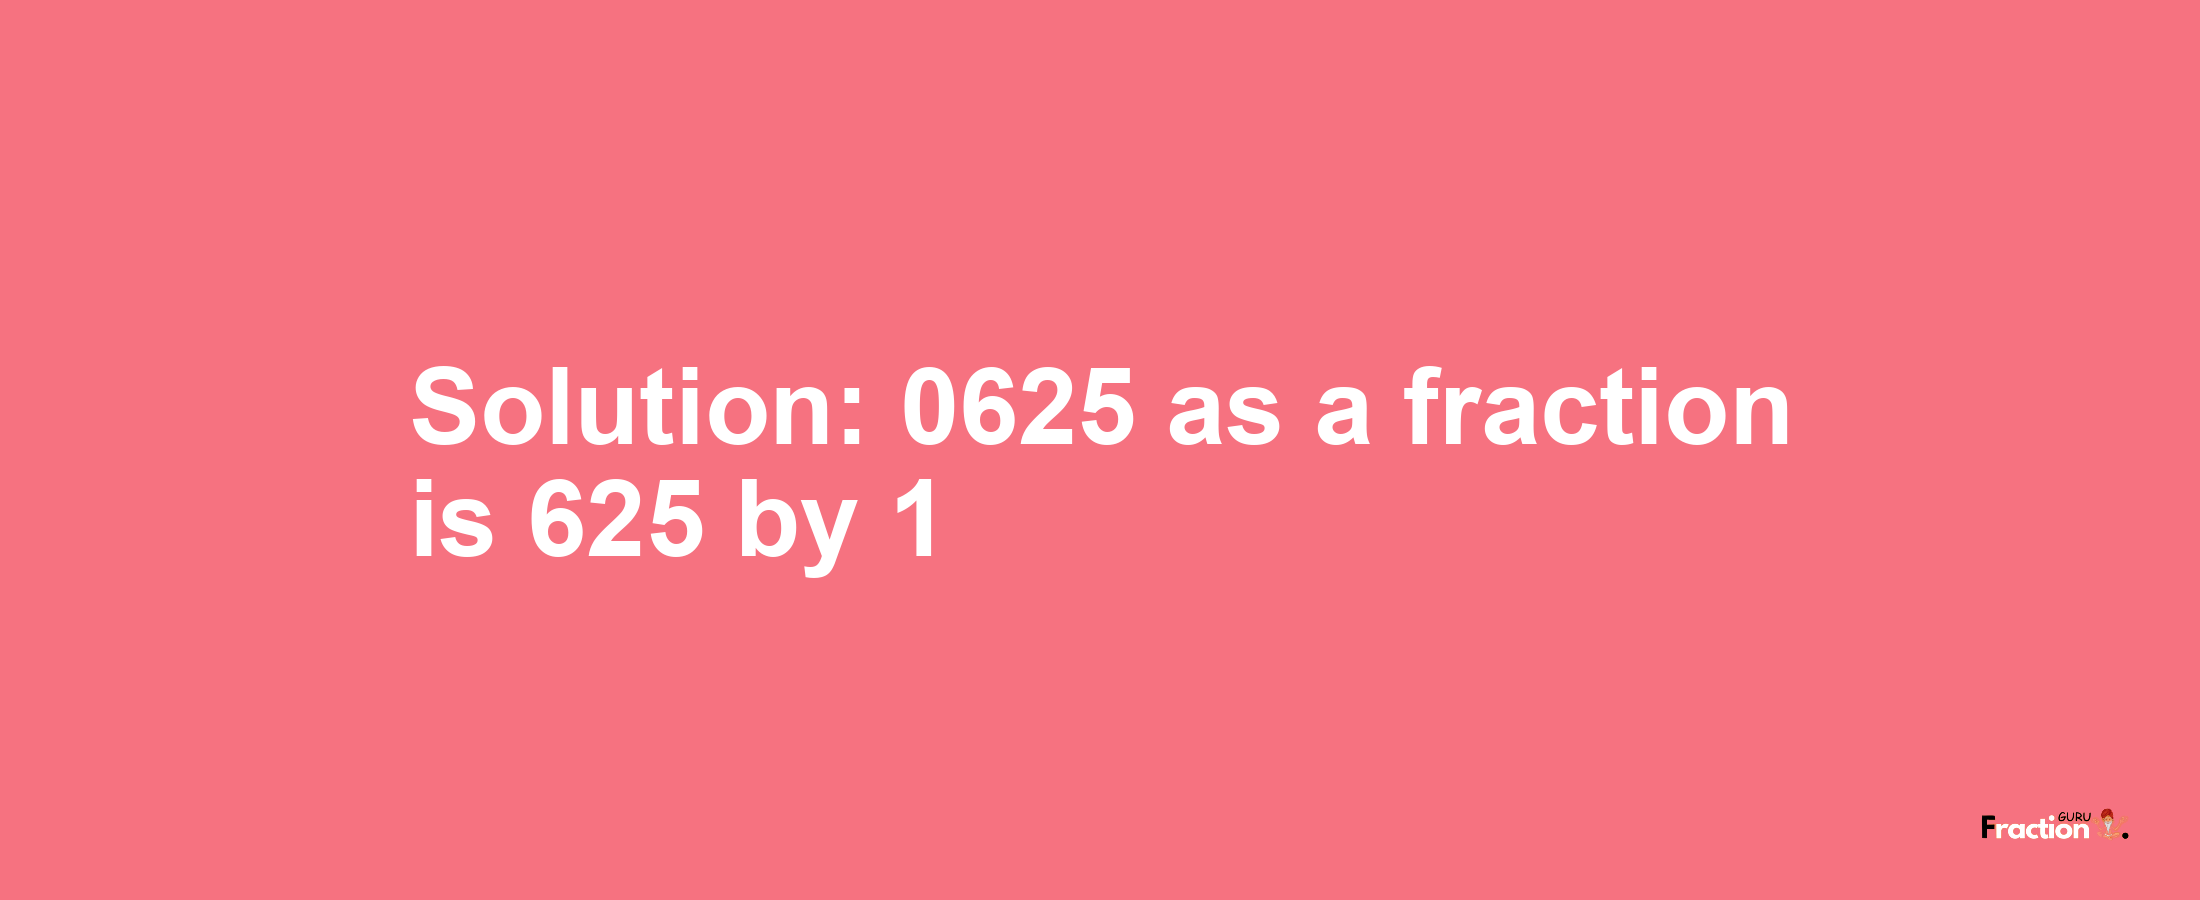 Solution:0625 as a fraction is 625/1